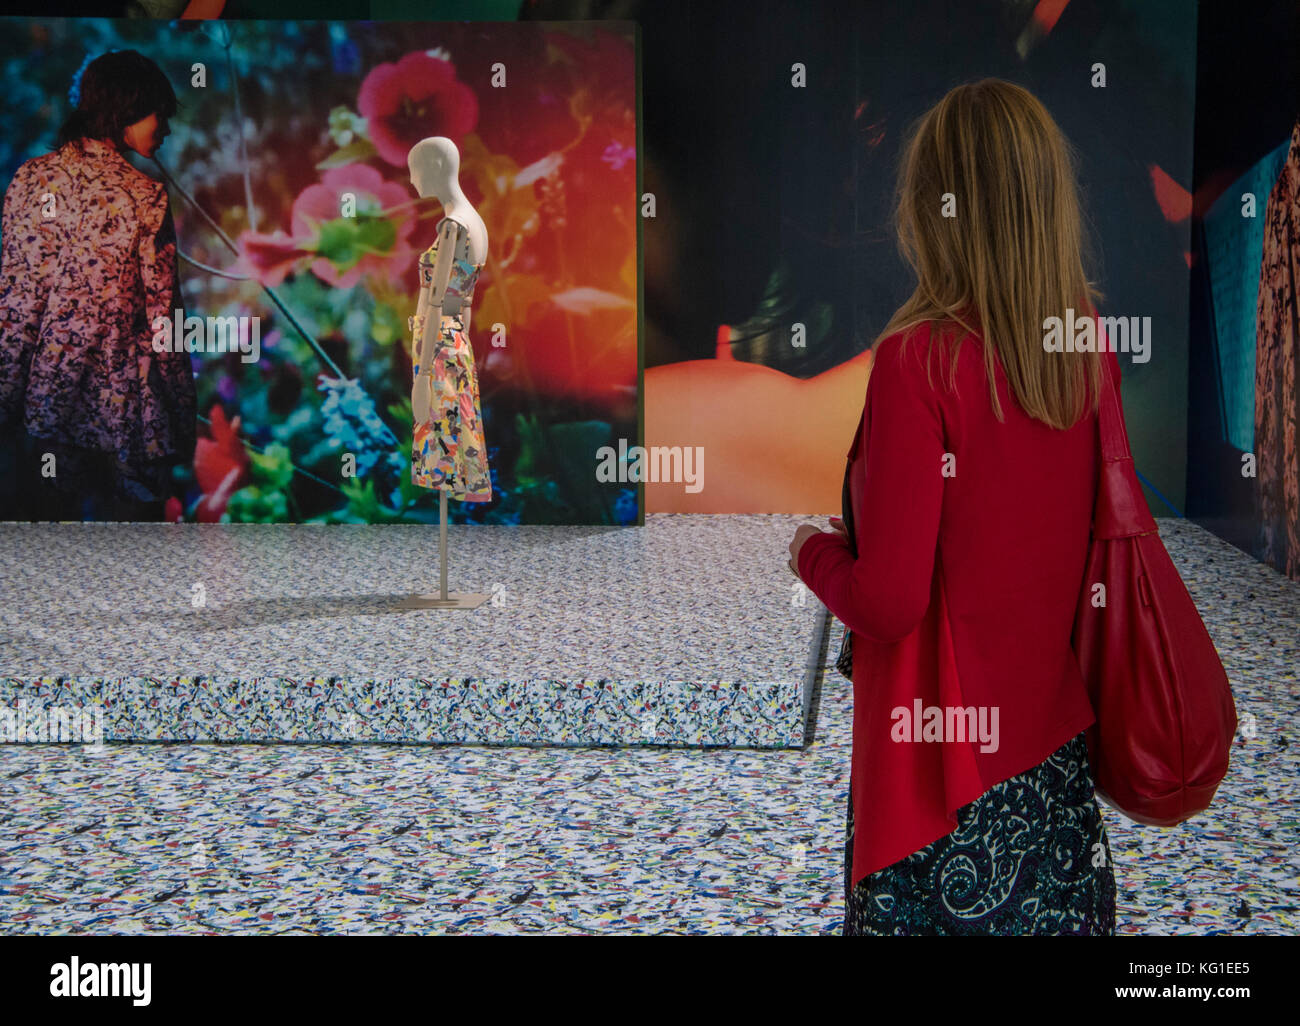 A woman walking by the exhibits in the exhibition 